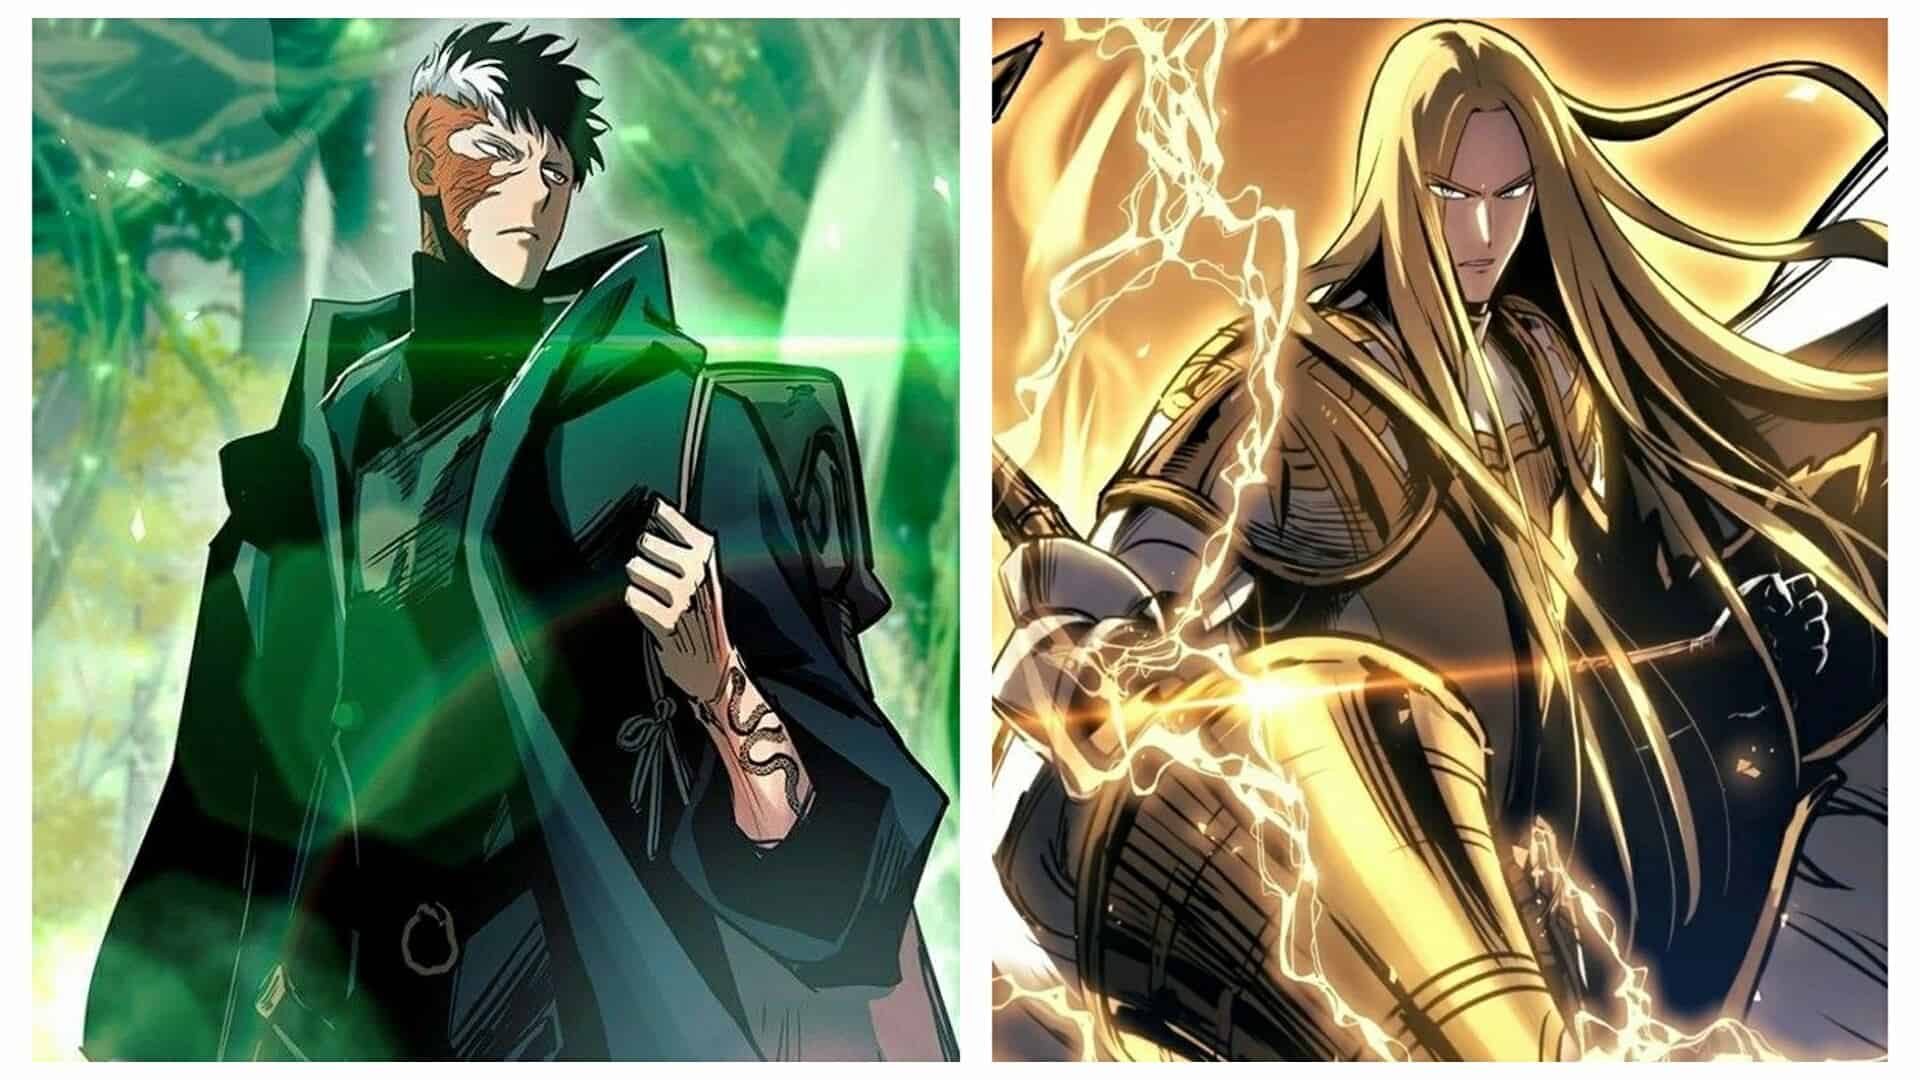 The Assassin From Persephone (Left) And Lucius (Right) - Reincarnation Of The Suicidal Battle God (Credits: Webtoon)